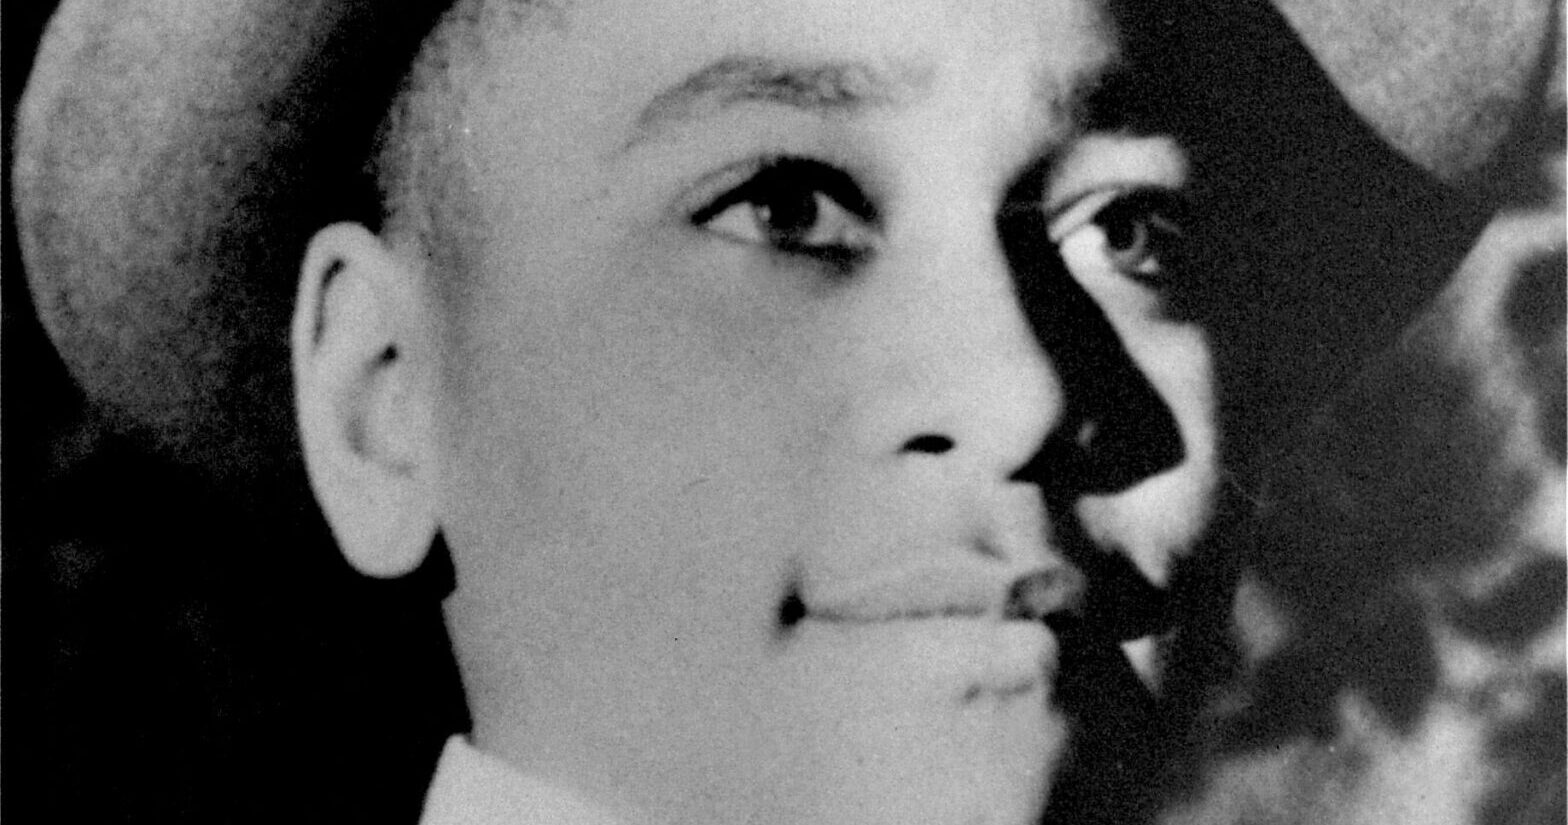 FILE - An undated portrait of Emmett Louis Till, a black 14 year old Chicago boy, whose weighted down body was found in the Tallahatchie River near the Delta community of Money, Mississippi, August 31, 1955. Local residents Roy Bryant, 24, and J.W. Milam, 35, were accused of kidnapping, torturing and murdering Till for allegedly whistling at Bryant's wife. A team searching the basement of a Mississippi courthouse for evidence about the lynching of Black teenager Emmett Till has found the unserved warrant in June 2022 charging a white woman in his kidnapping in 1955, and relatives of the victim want authorities to finally arrest her nearly 70 years later. (AP Photo, File)